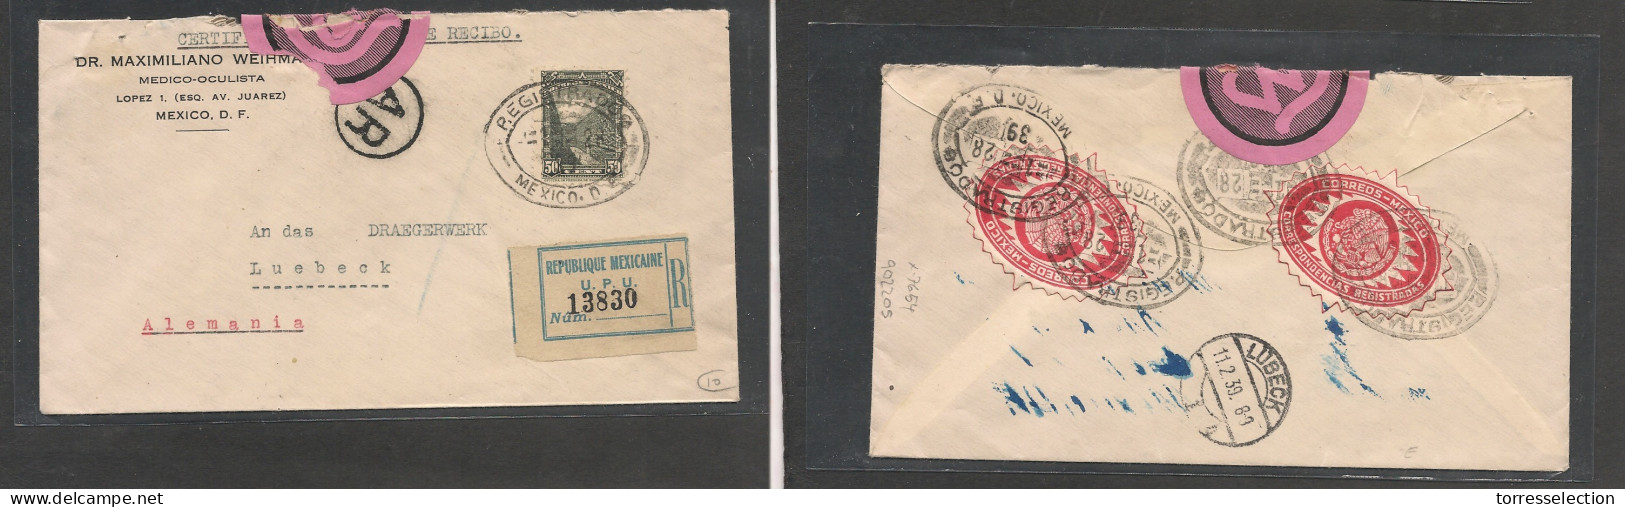 MEXICO. Mexico Cover - 1928 DF To Germany Lubeck Registered AR Single Fkd Env+ Resealed Label Transited Oftalmologist Bu - Mexico